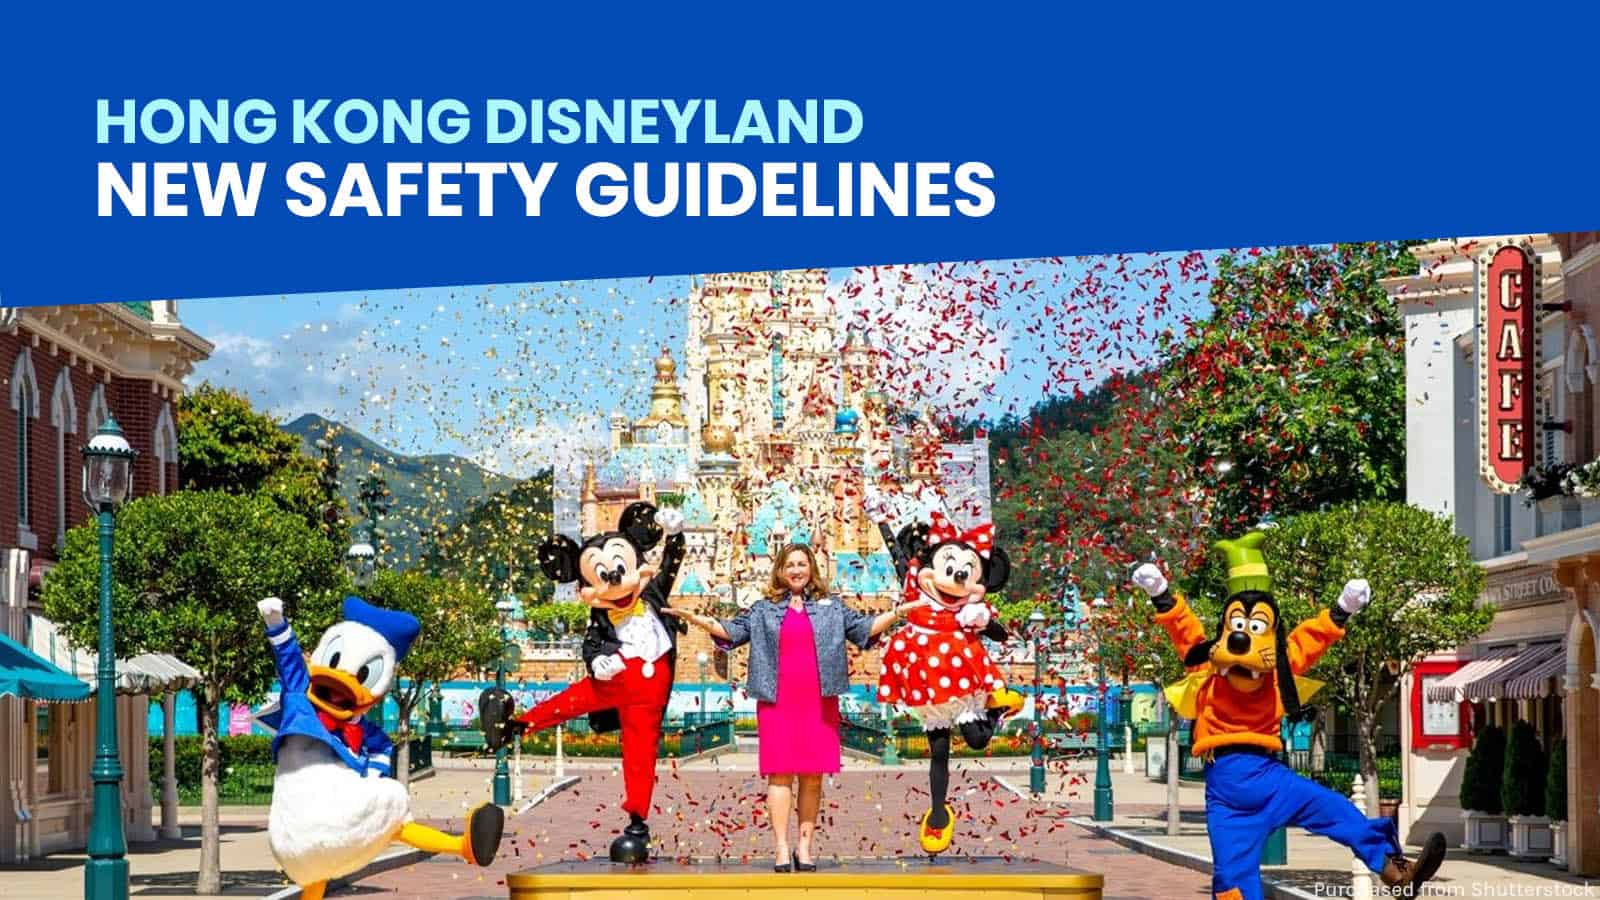 HONG KONG DISNEYLAND REOPENING: List of New Health and Safety Guidelines